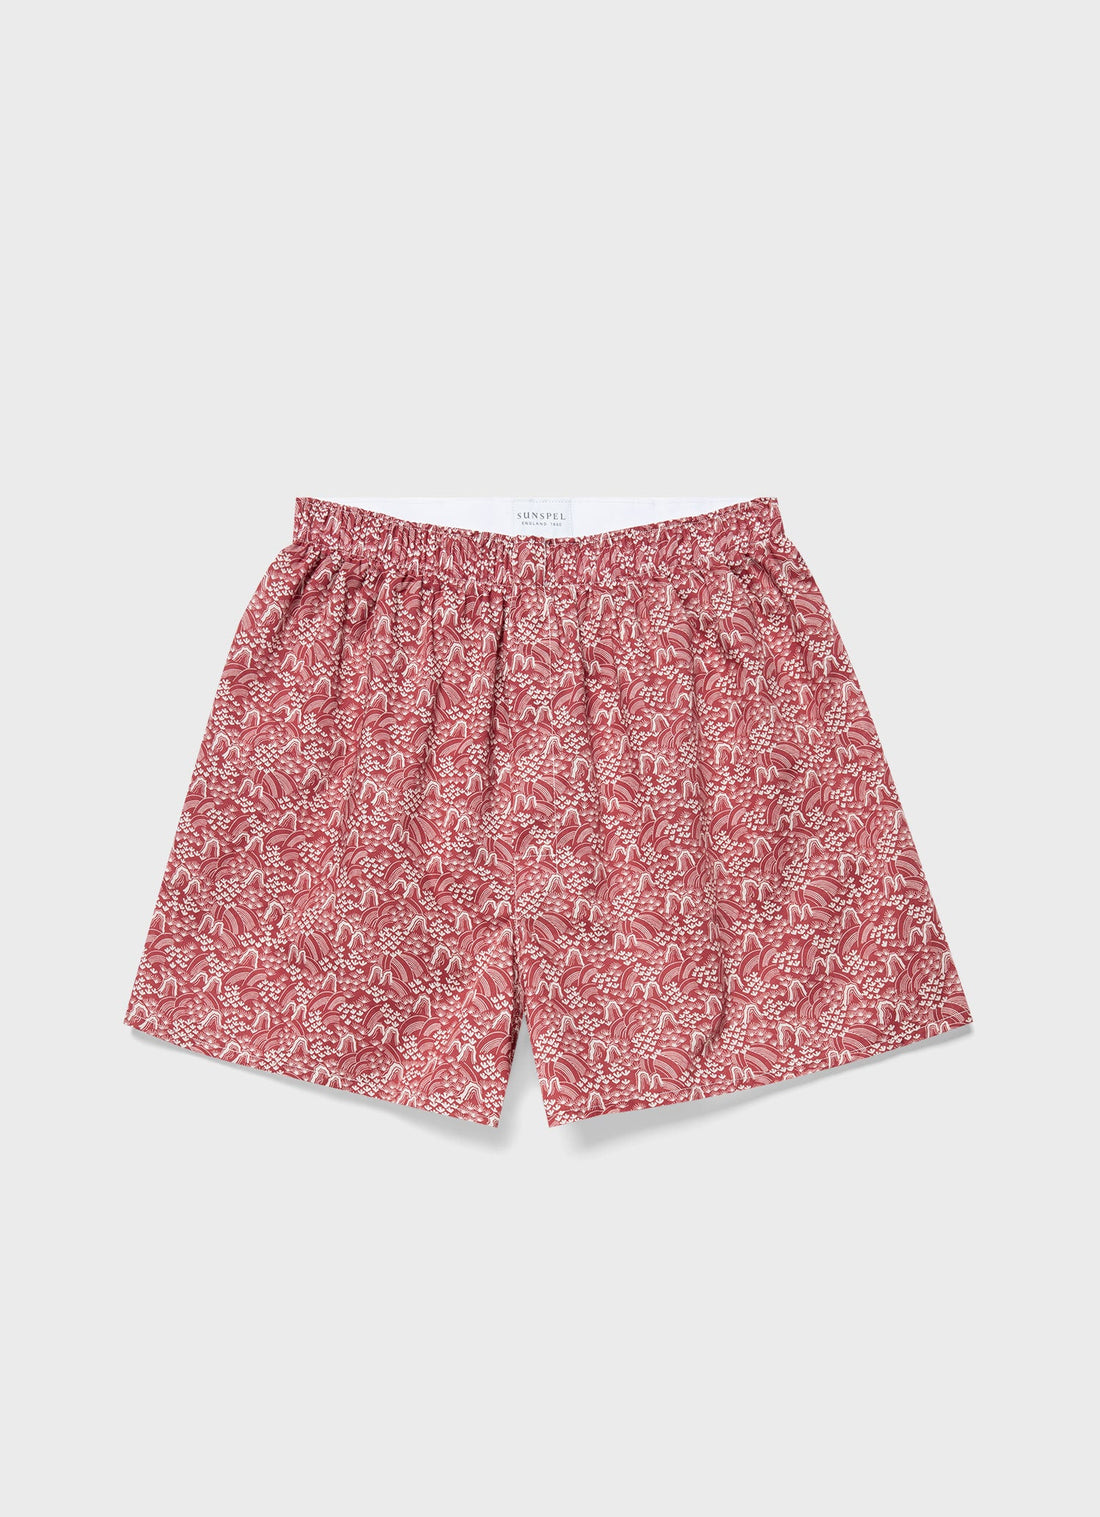 Men's Liberty Print Boxer Shorts in Japanese Floral